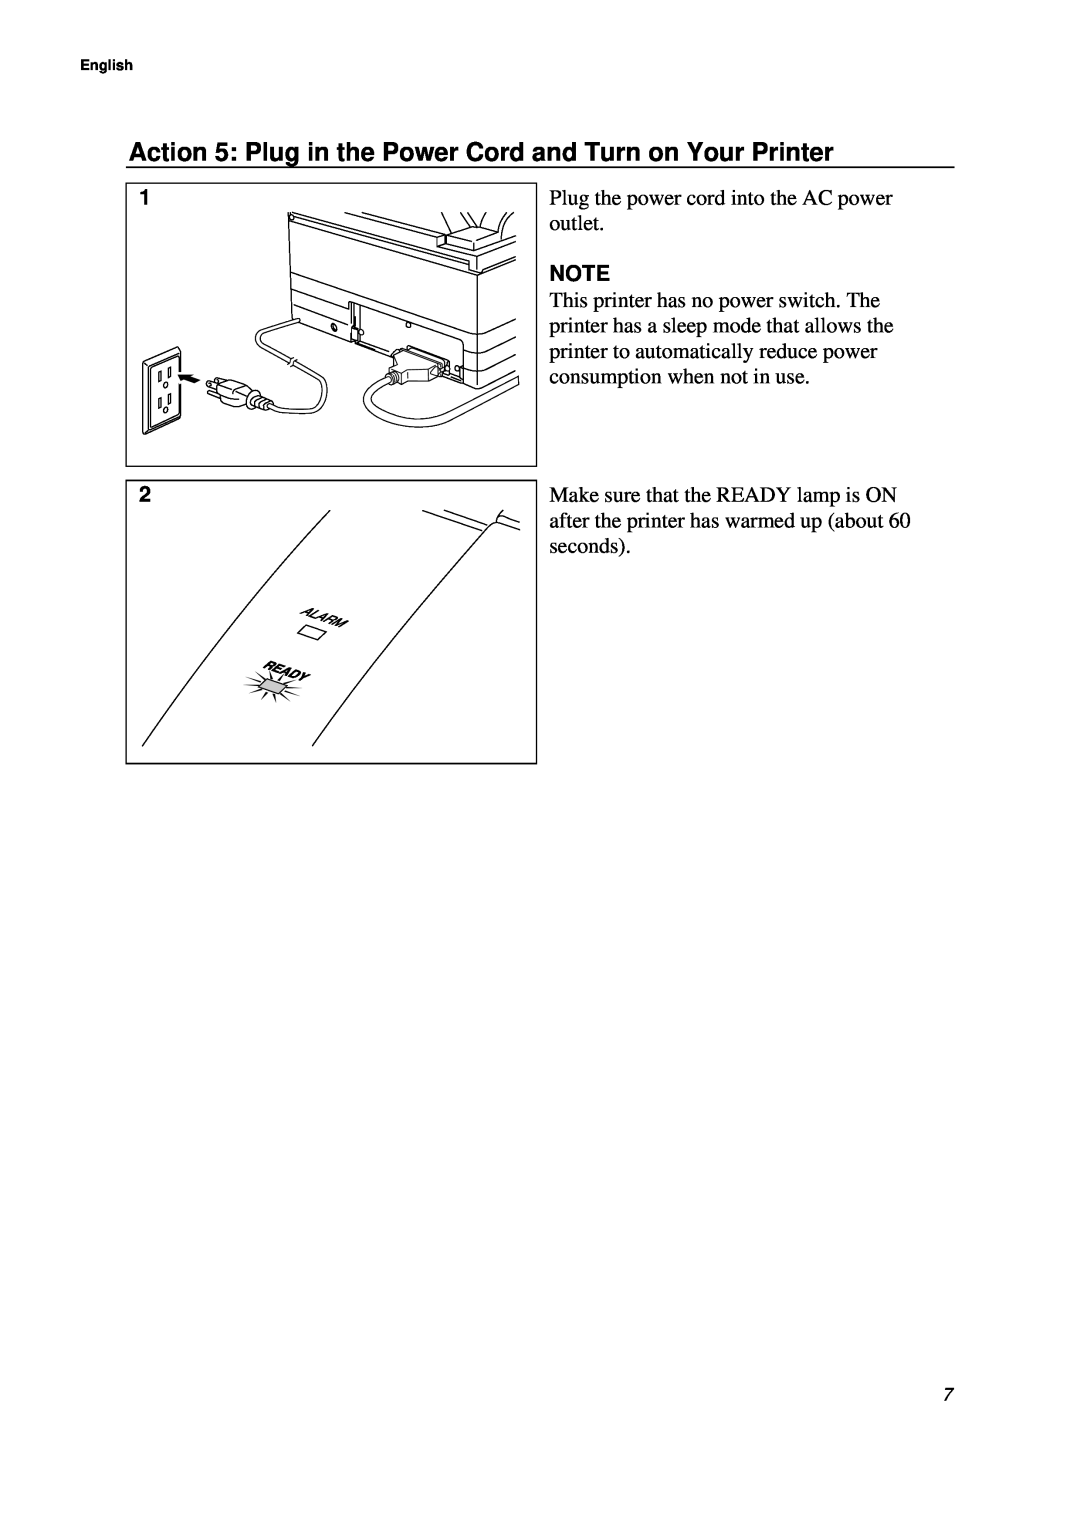 Brother WL-660 Series setup guide Action 5 Plug in the Power Cord and Turn on Your Printer 